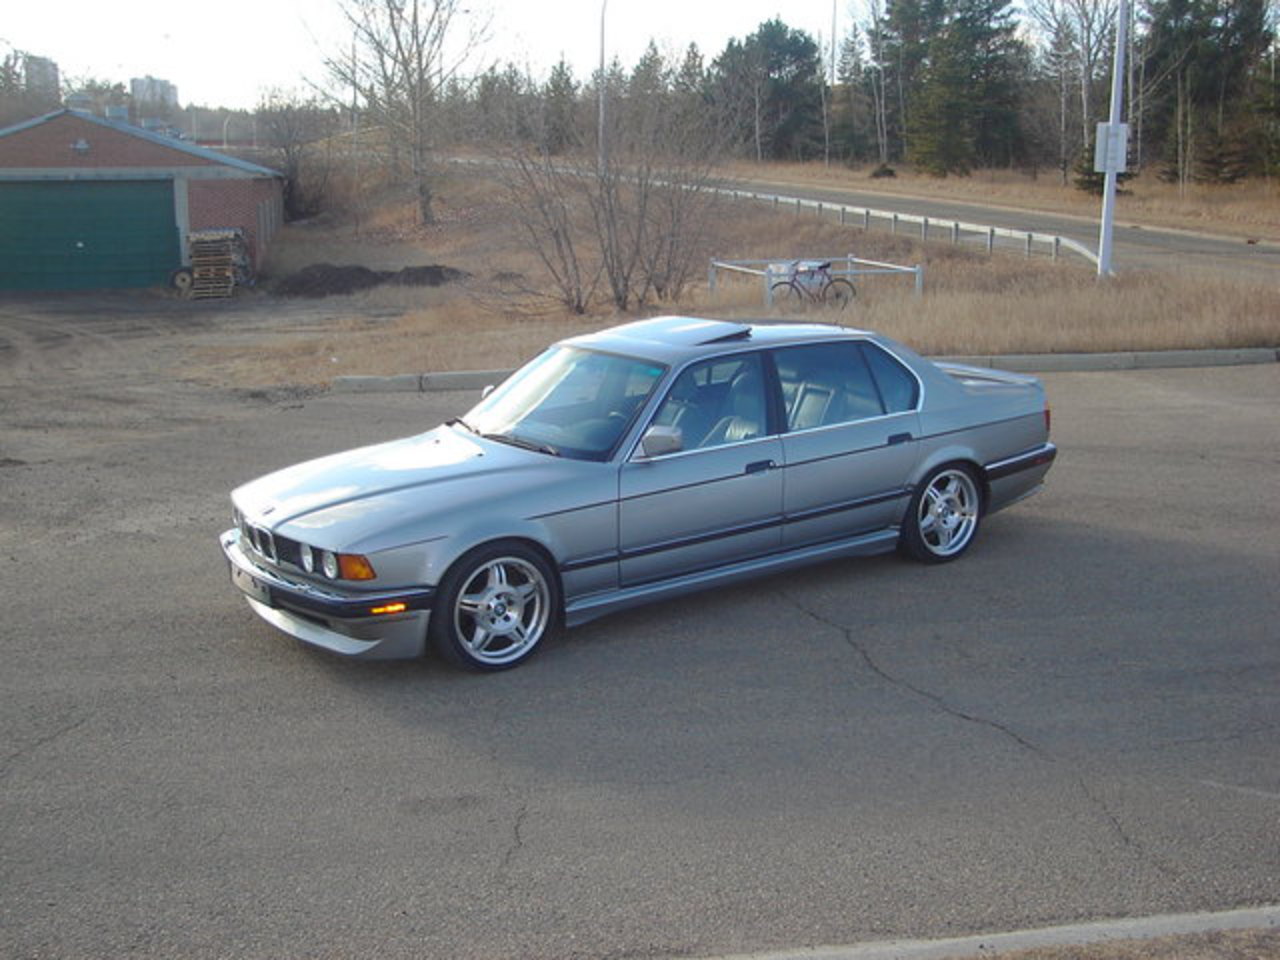 common, lets not forget the lovely E32.